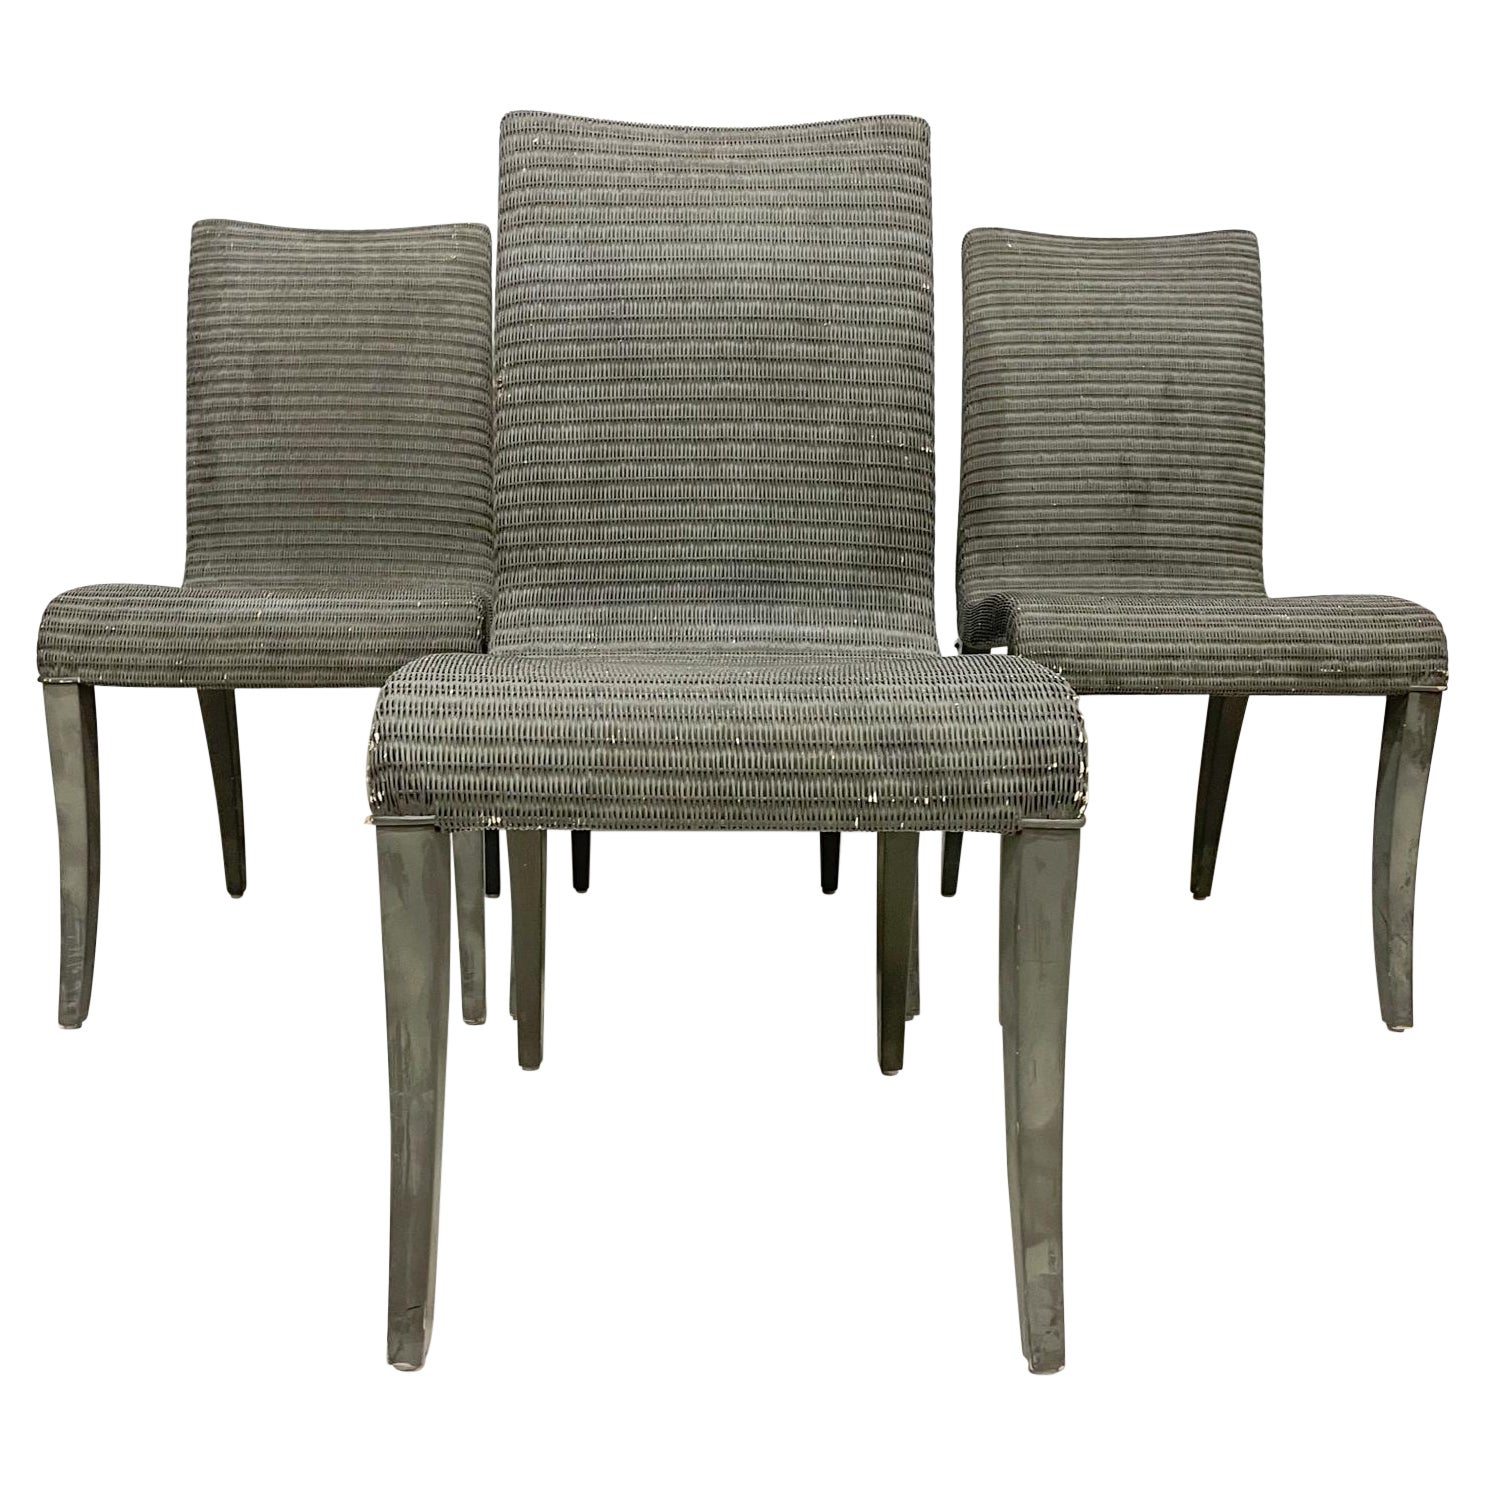 Vincent Sheppard sculptural woven Dining Chairs Set of Four 
Janus et Cie for Lloyd Loom Furniture
Retains maker label.
Woven Paper Chairs Janus et Cie Paper wrapped wire looks like wicker, but it isn't, it is much stronger.
36 h x 23 d x 18 w seat